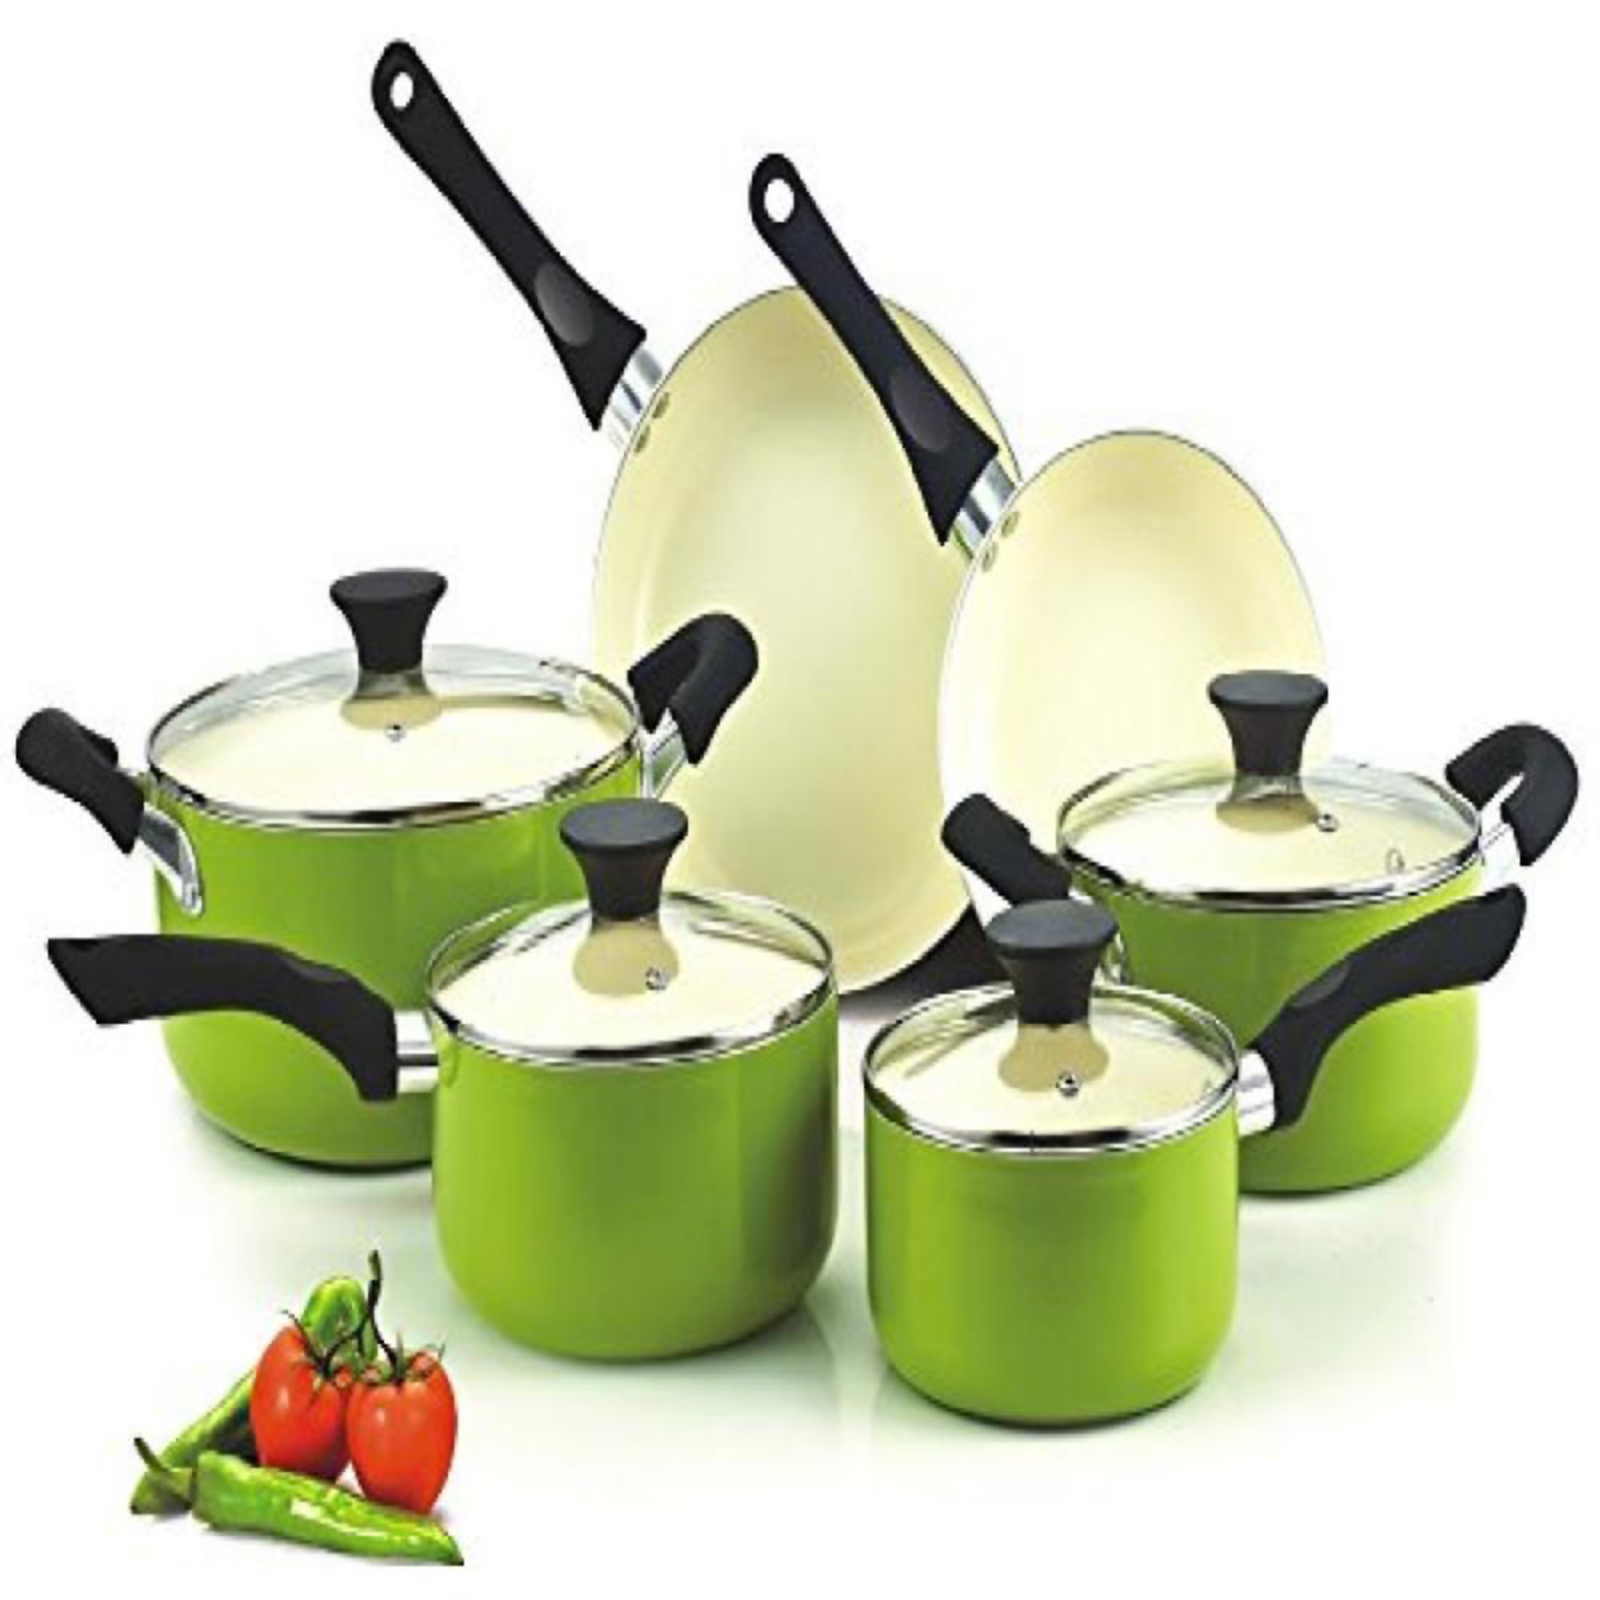 Cook N Home Pots and Pans Set Nonstick, 10-Piece Ceramic Kitchen Cookw